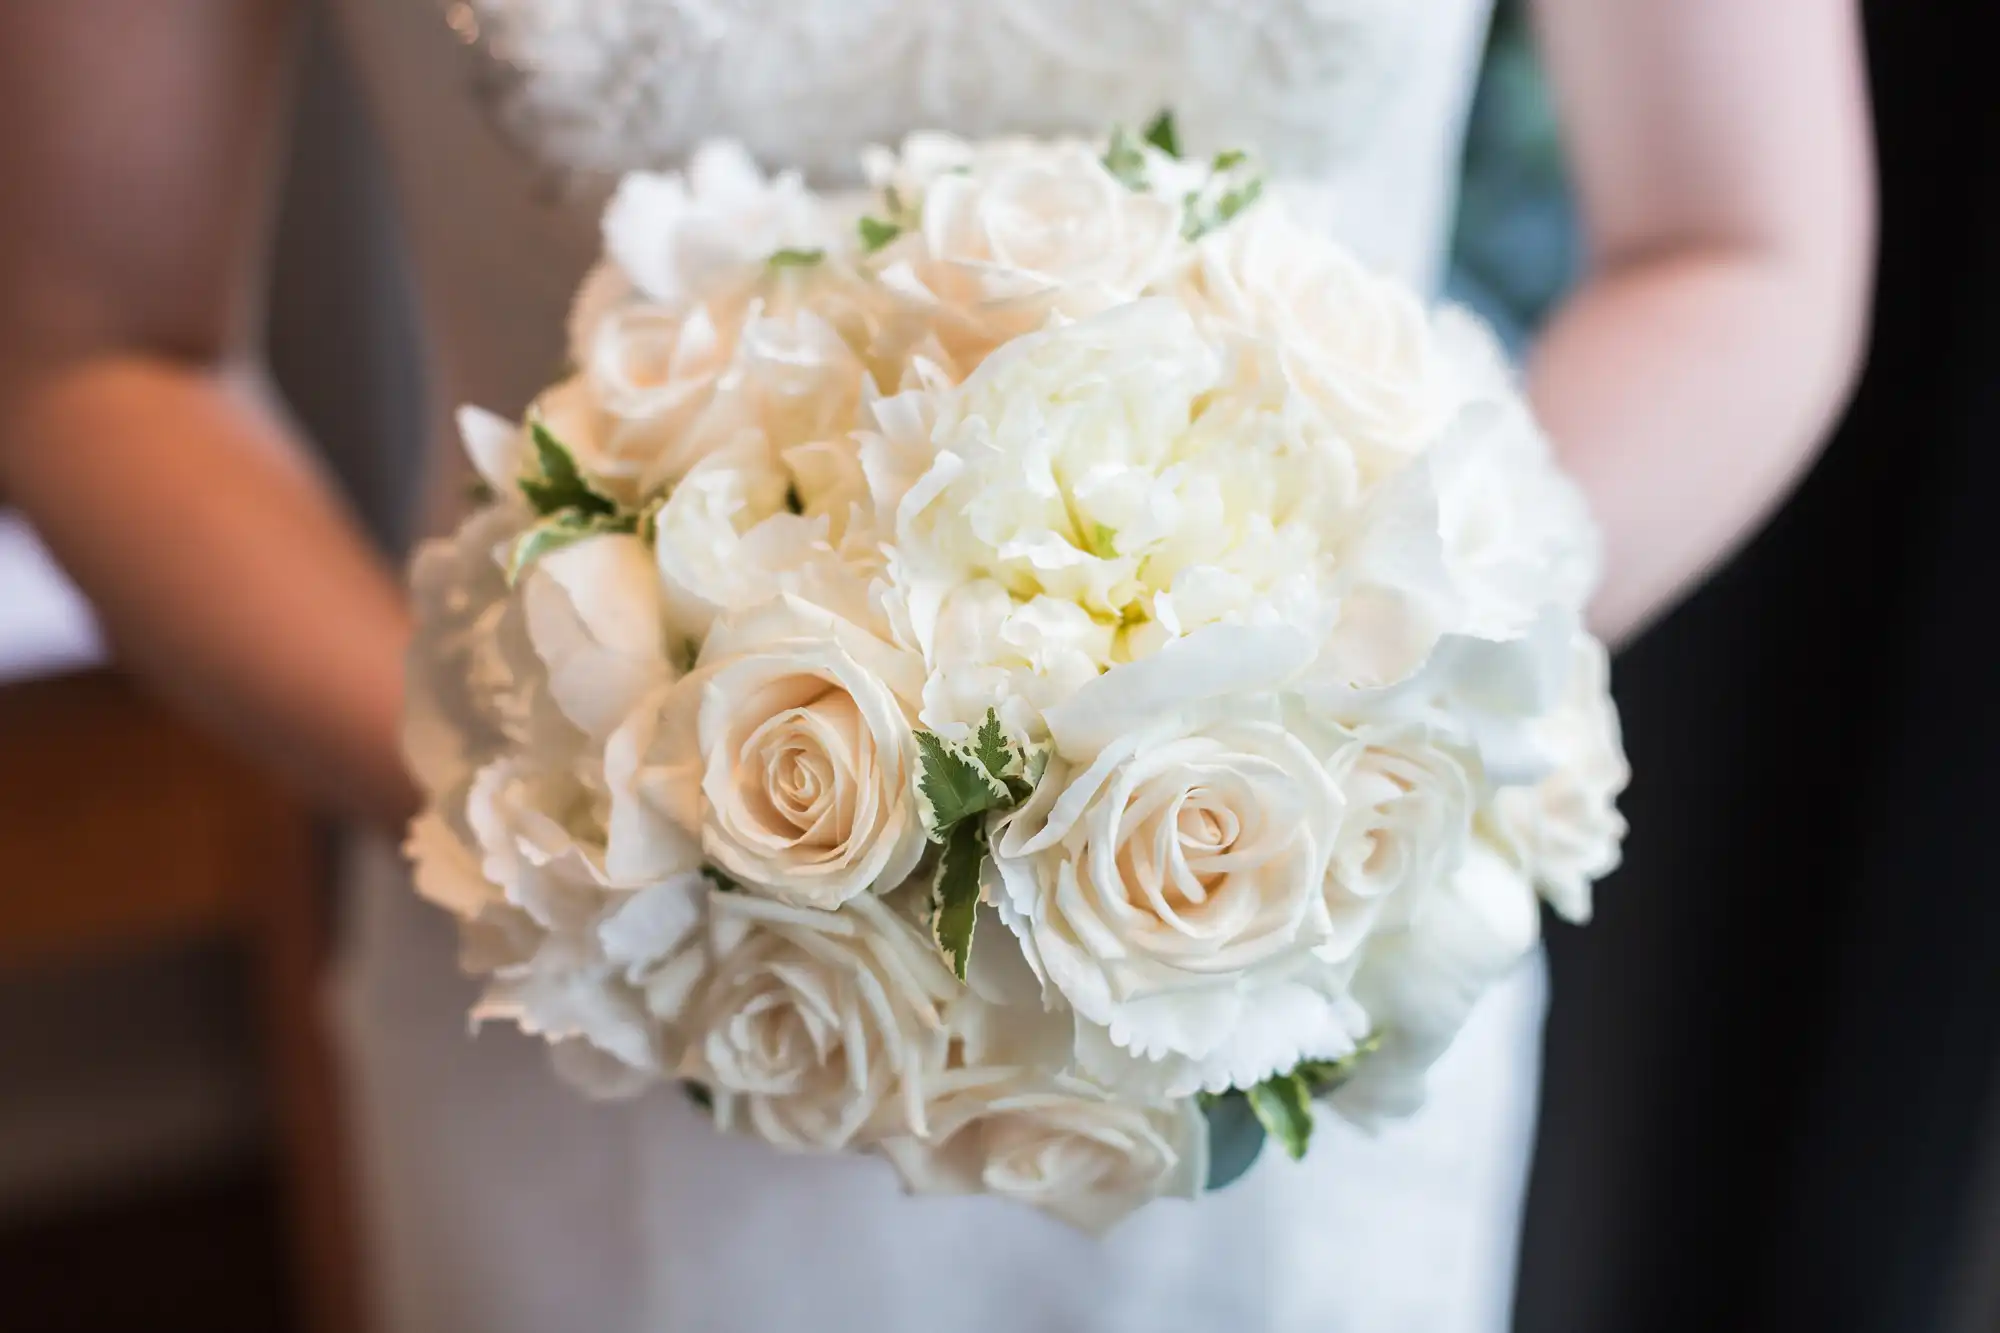 A bride in a lace dress holds a bouquet of white roses and peonies.